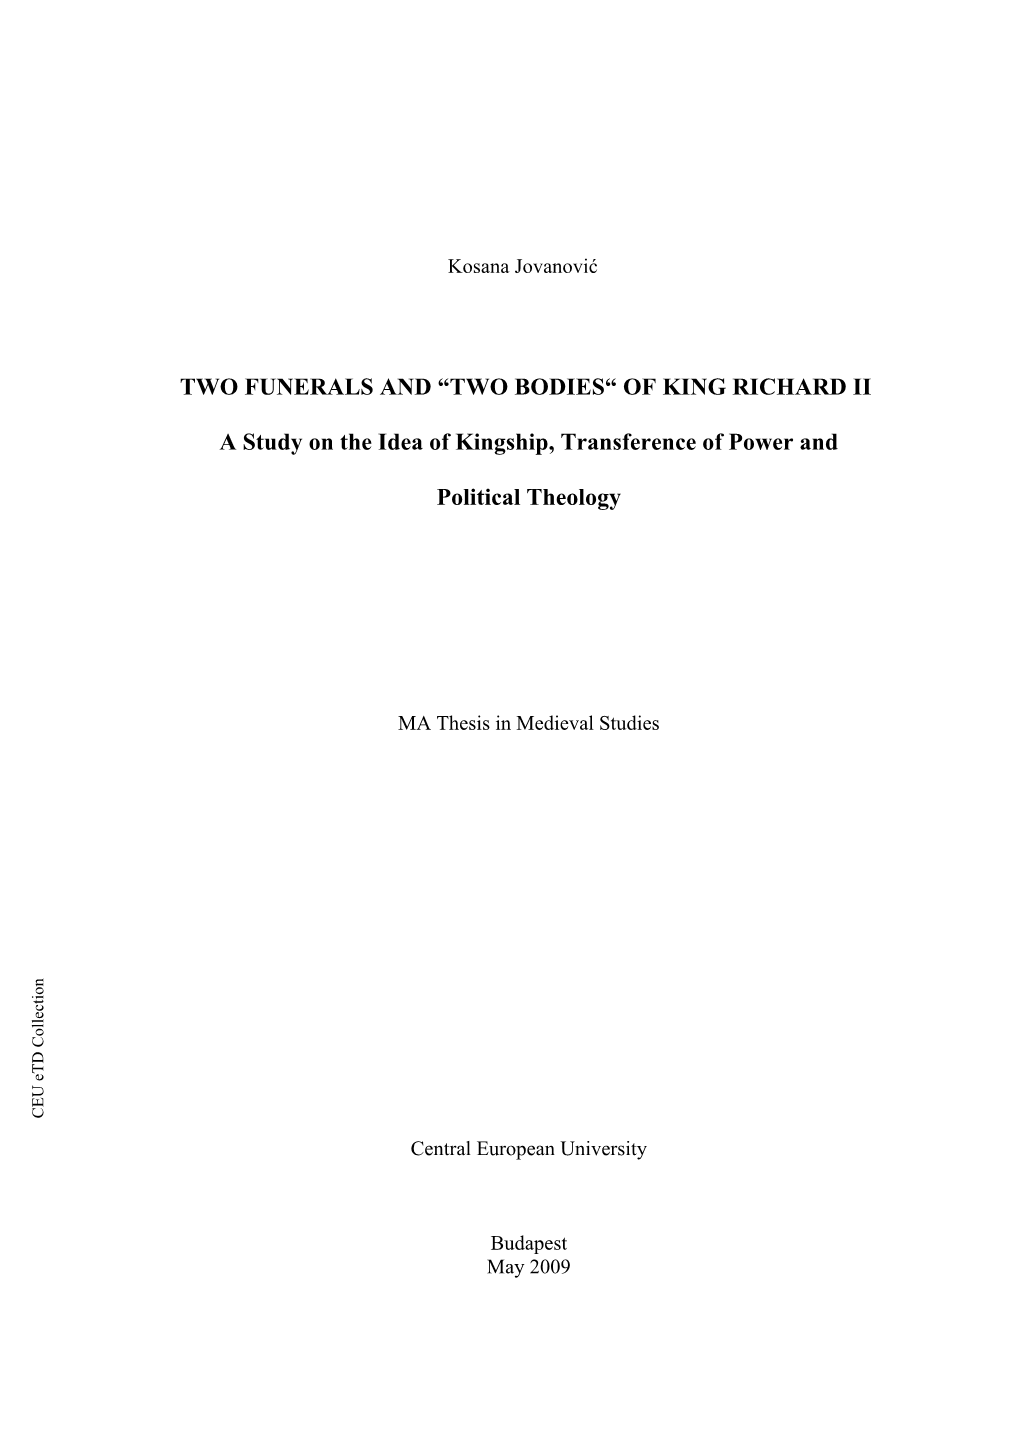 “TWO BODIES“ of KING RICHARD II a Study on the Idea of Kingship